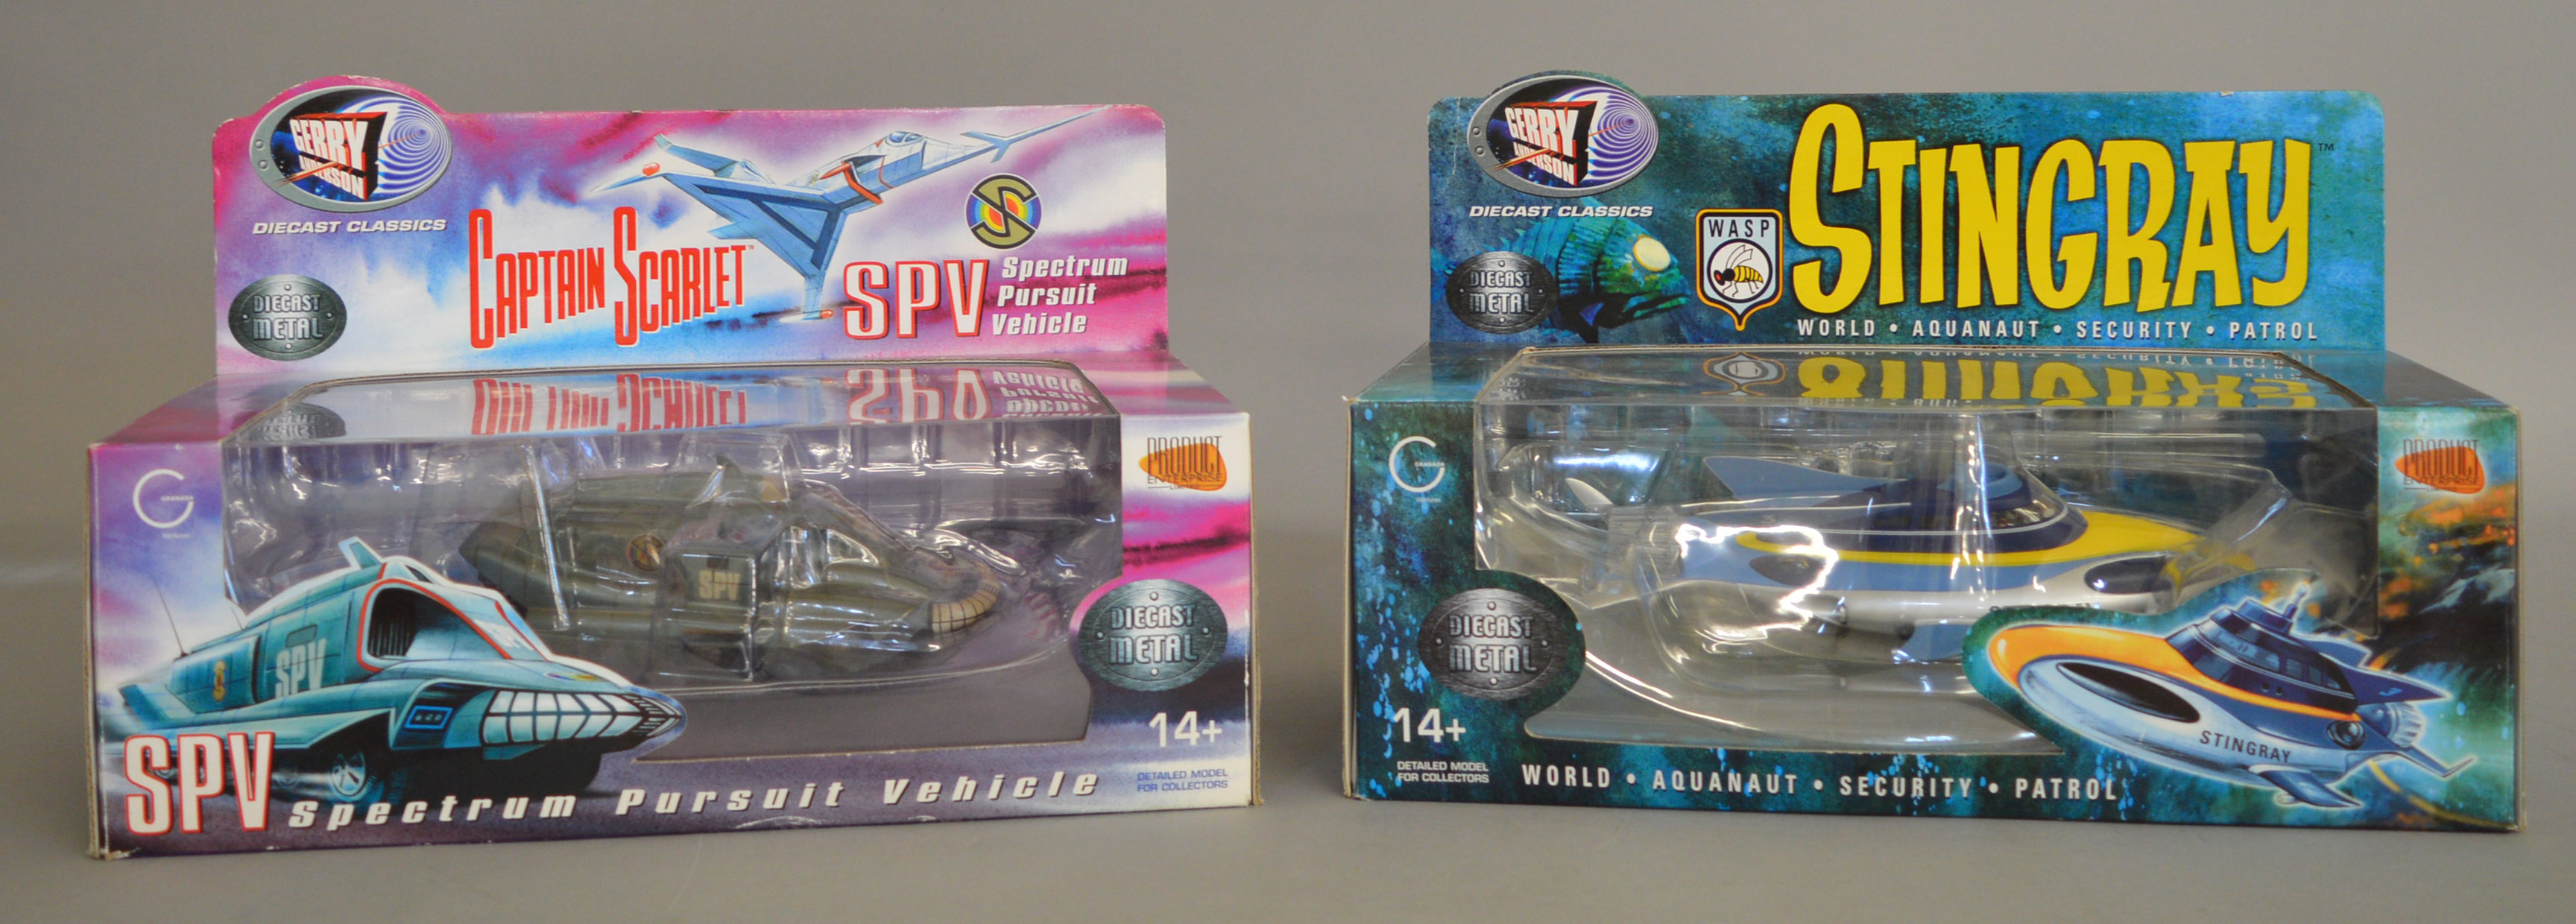 2 Gerry Anderson related diecast models by Product Enterprise, 'Stingray' and 'Captain Scarlet